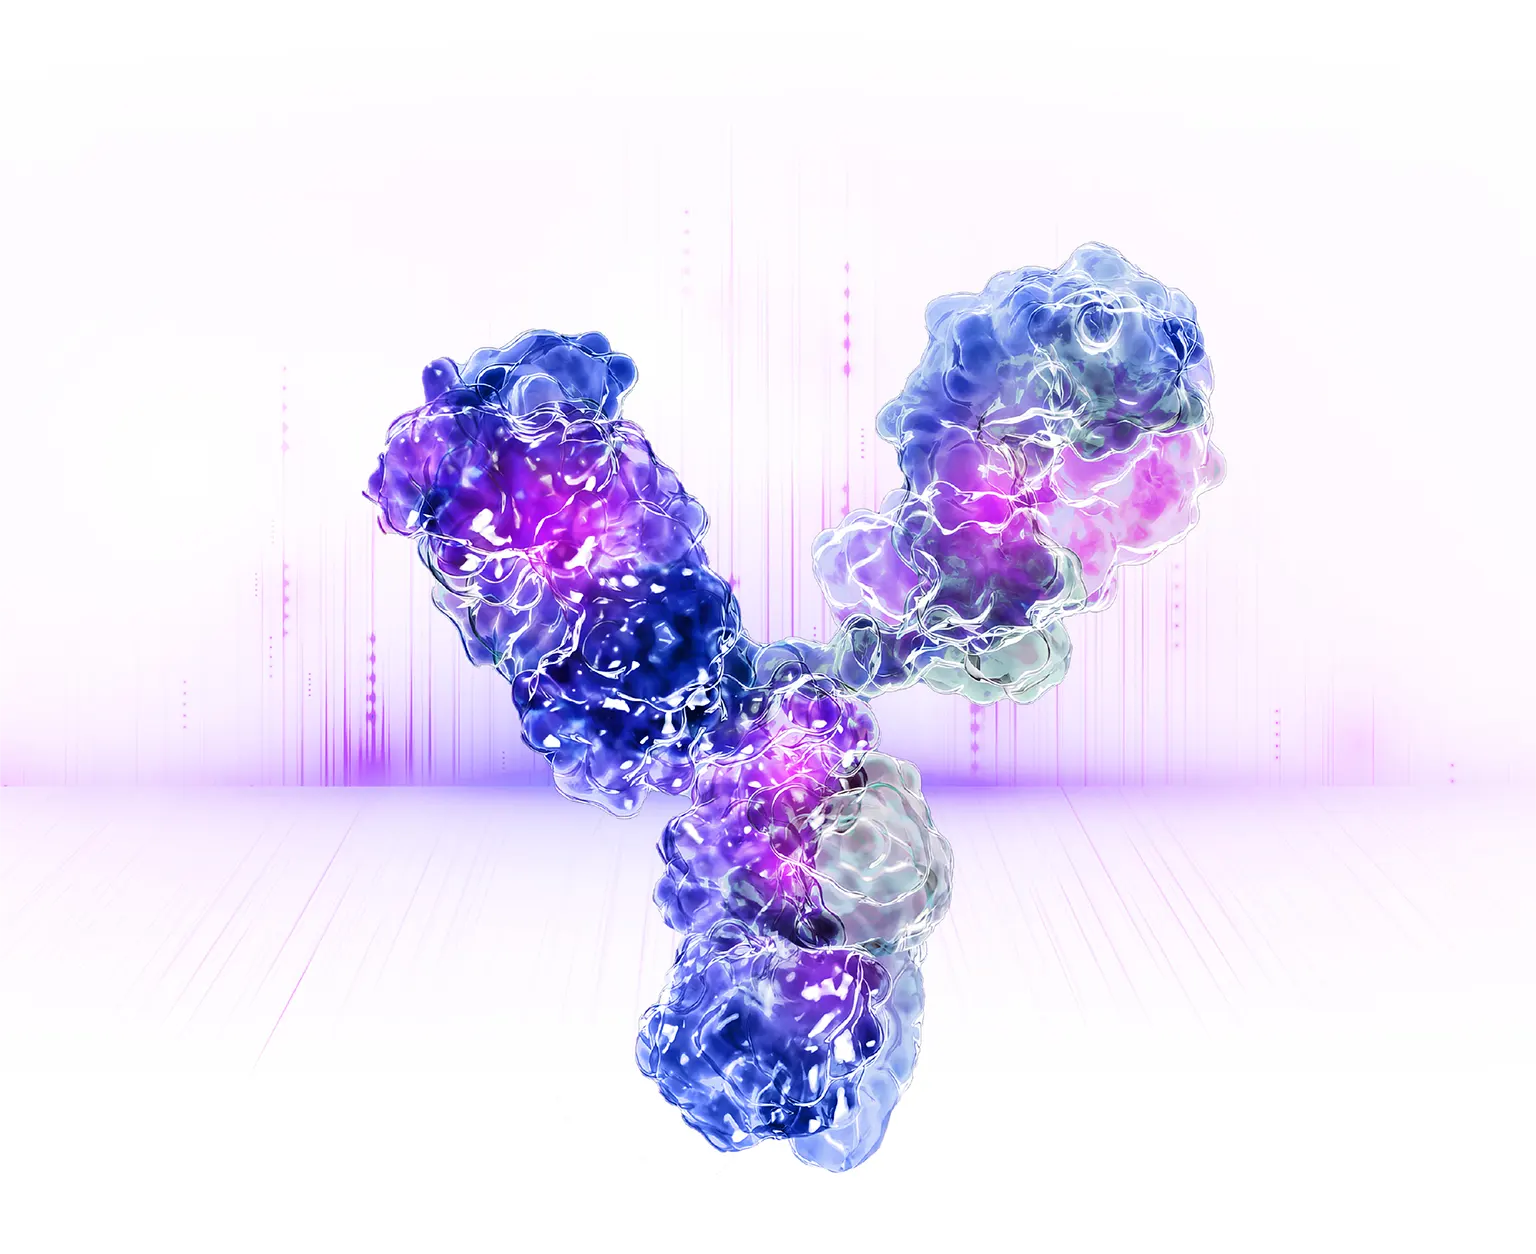 Artist’s 3D interpretation of an antibody-based therapy developed to address an evolving viral threat